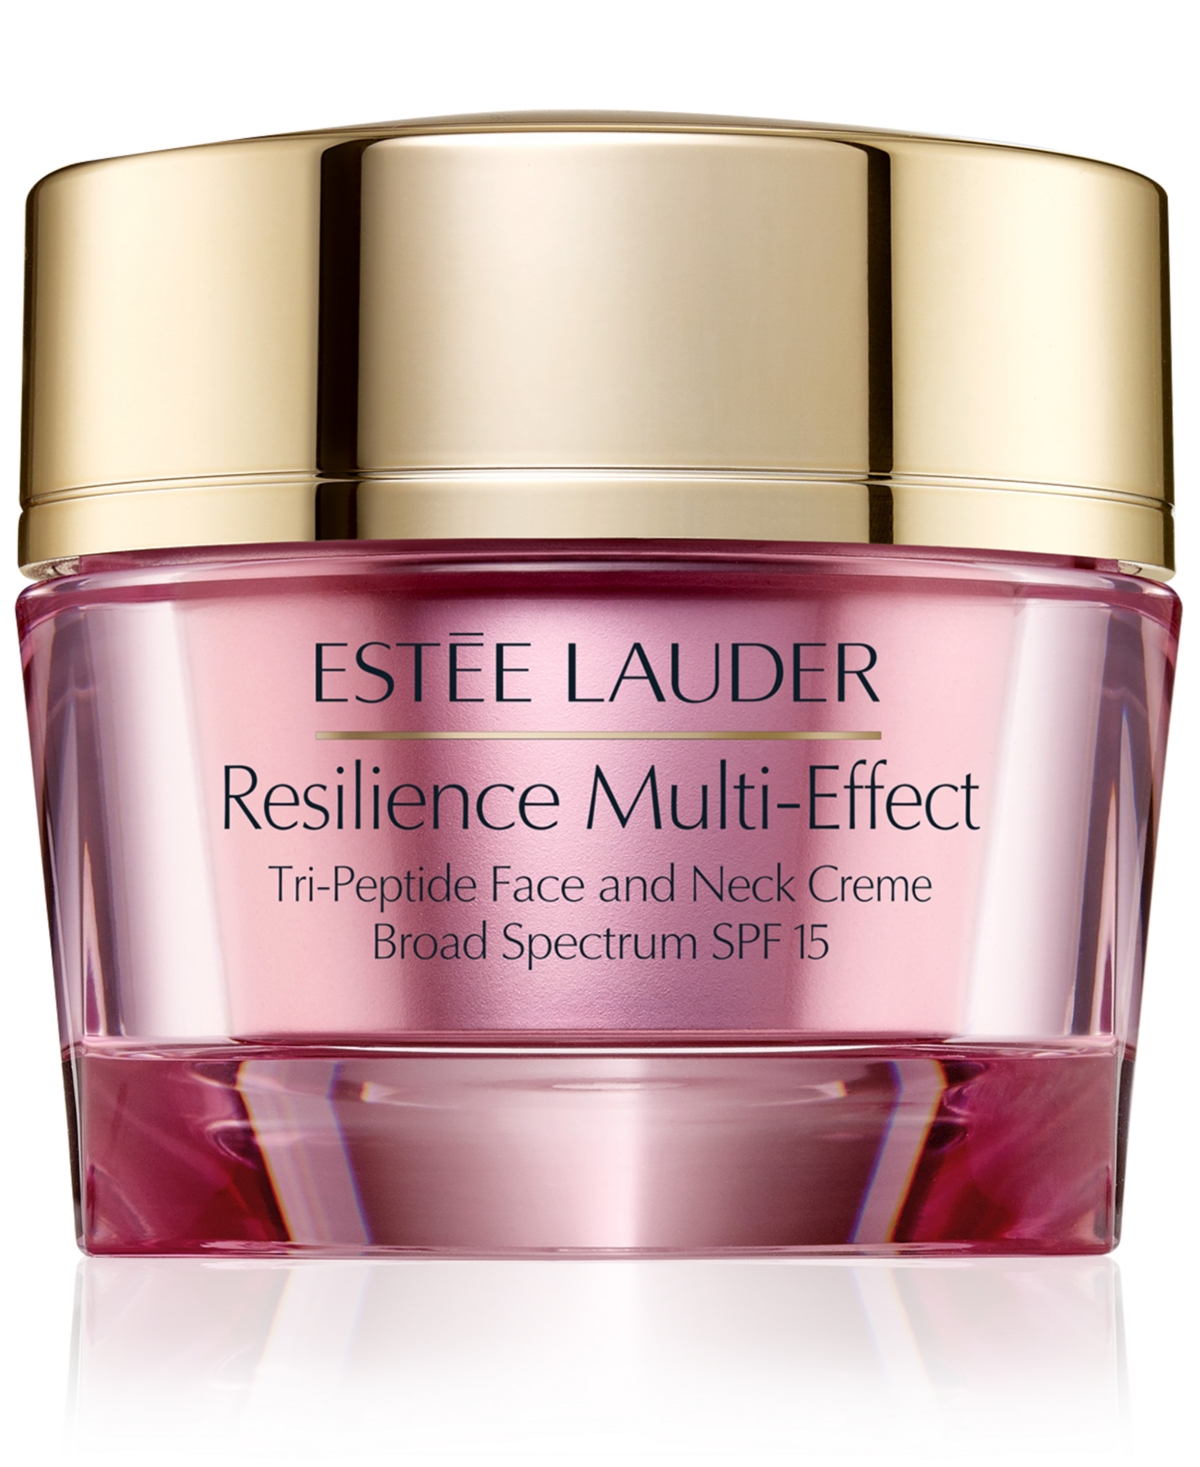 Resilience Multi-Effect Tri-Peptide Face and Neck Moisturizer Creme Spf 15, 2.5 oz.